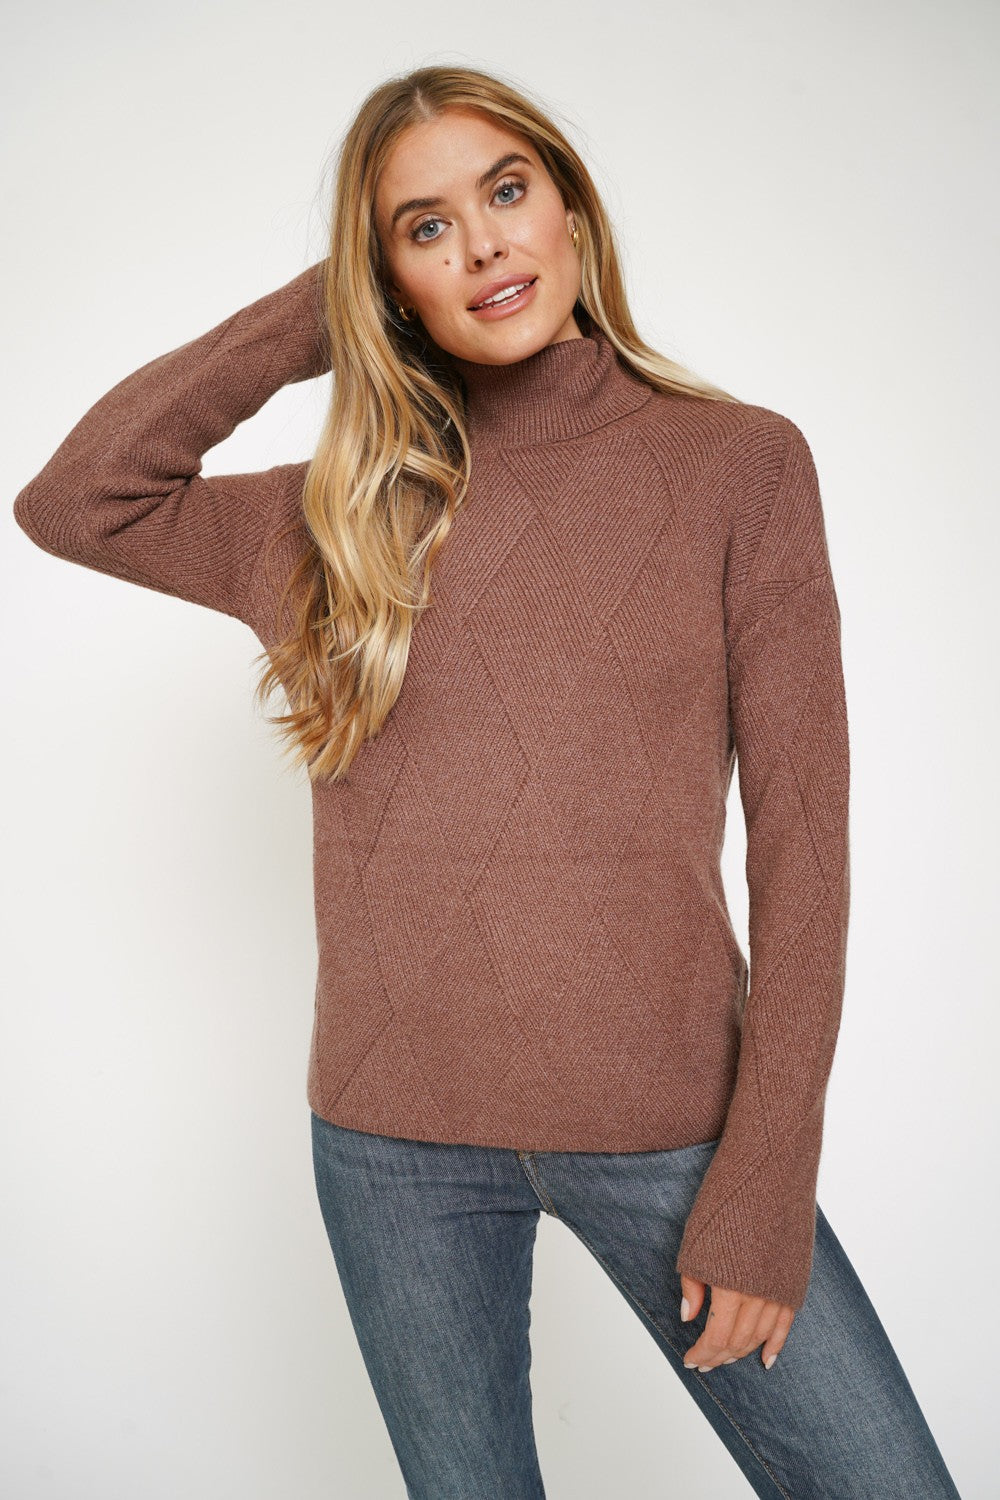 Chocolate Mousse Sweater